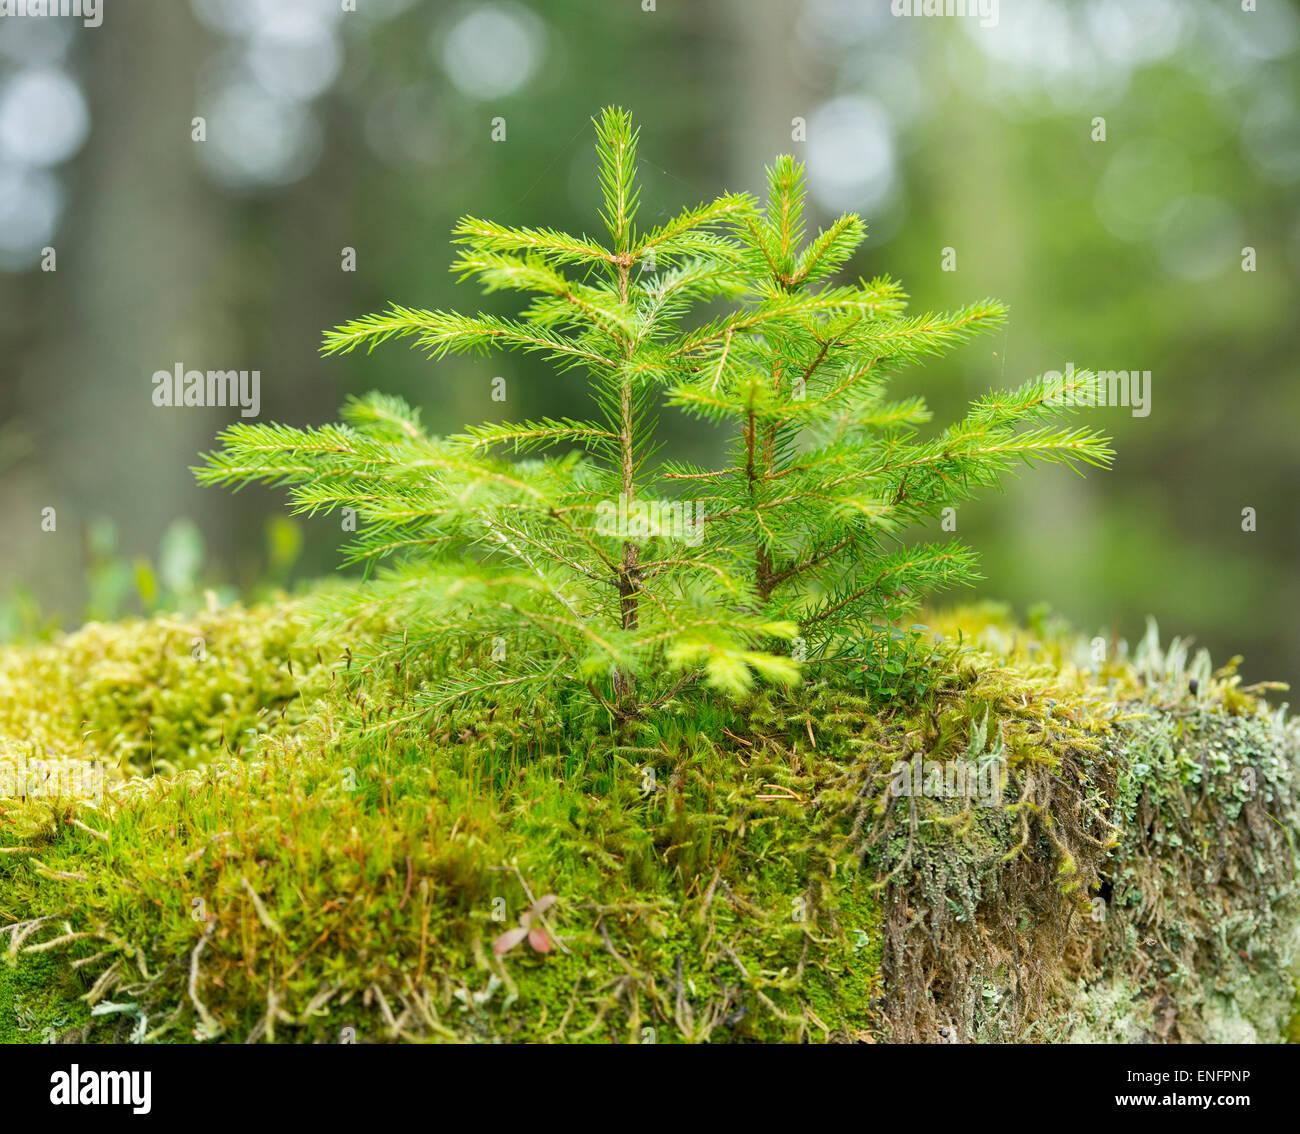 young-norway-spruce-trees-picea-abies-growing-on-moss-harz-national-ENFPNP.jpg